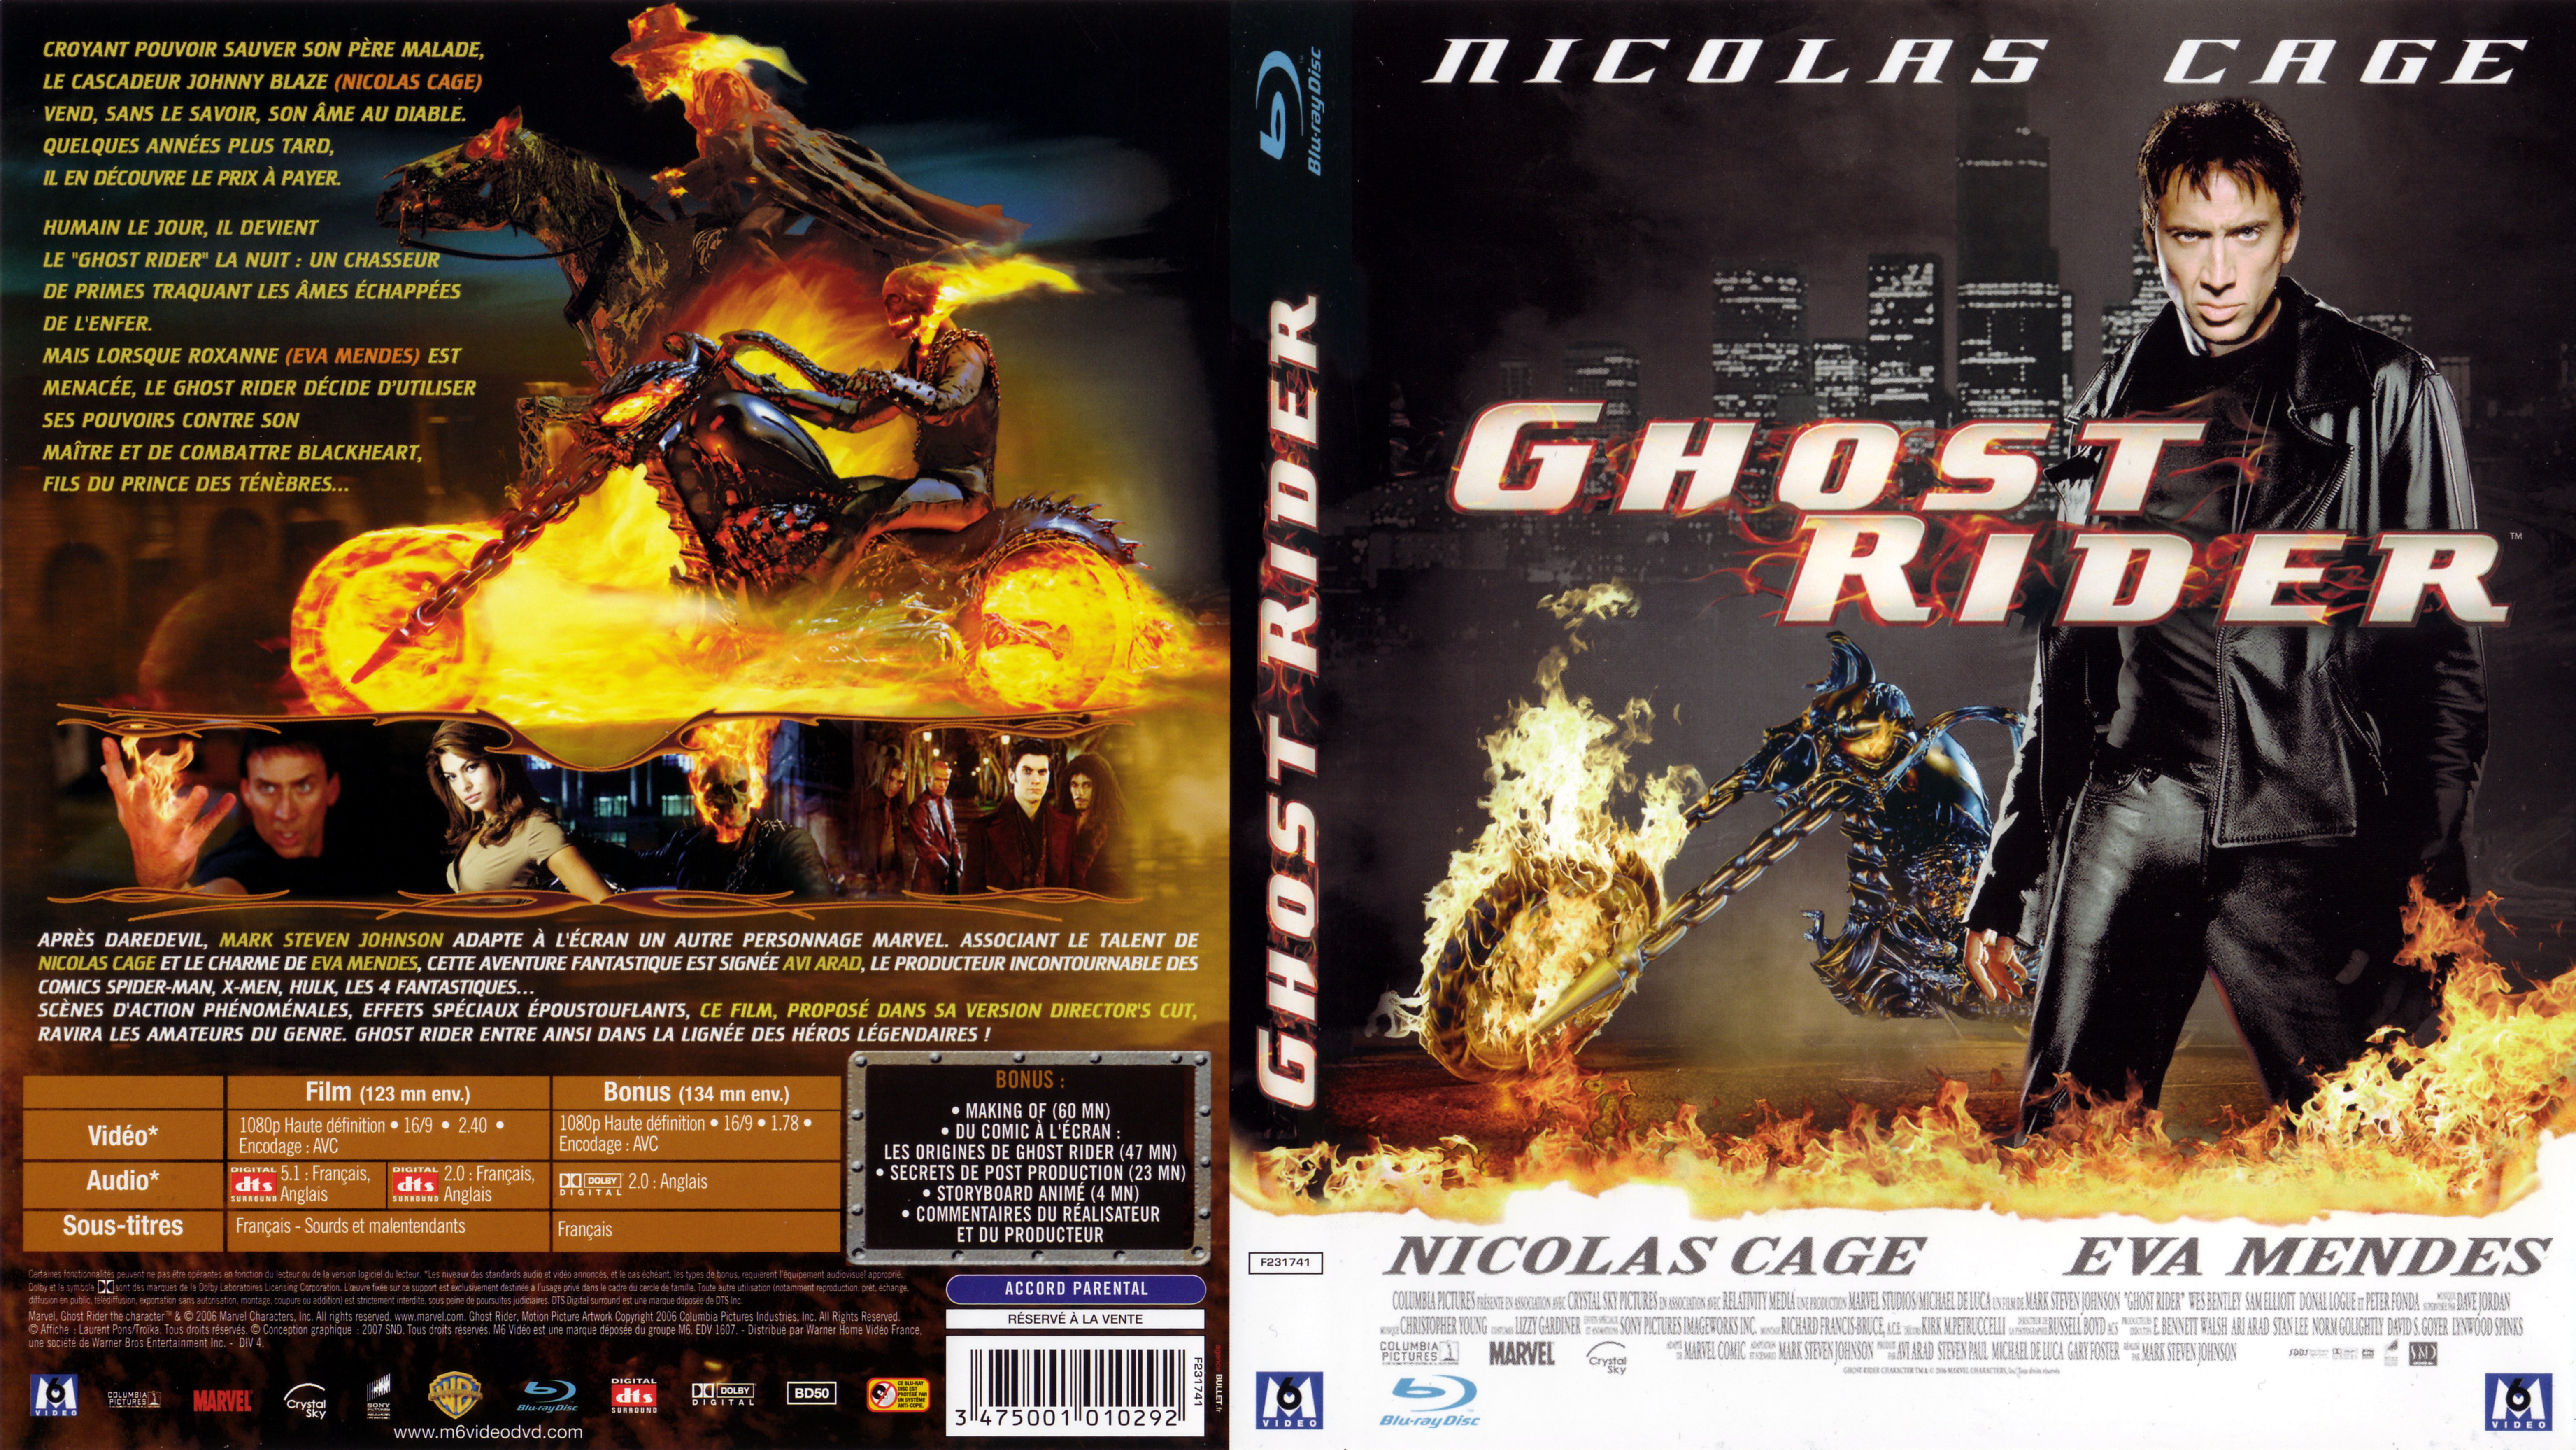 Jaquette DVD Ghost rider (BLU-RAY) v2